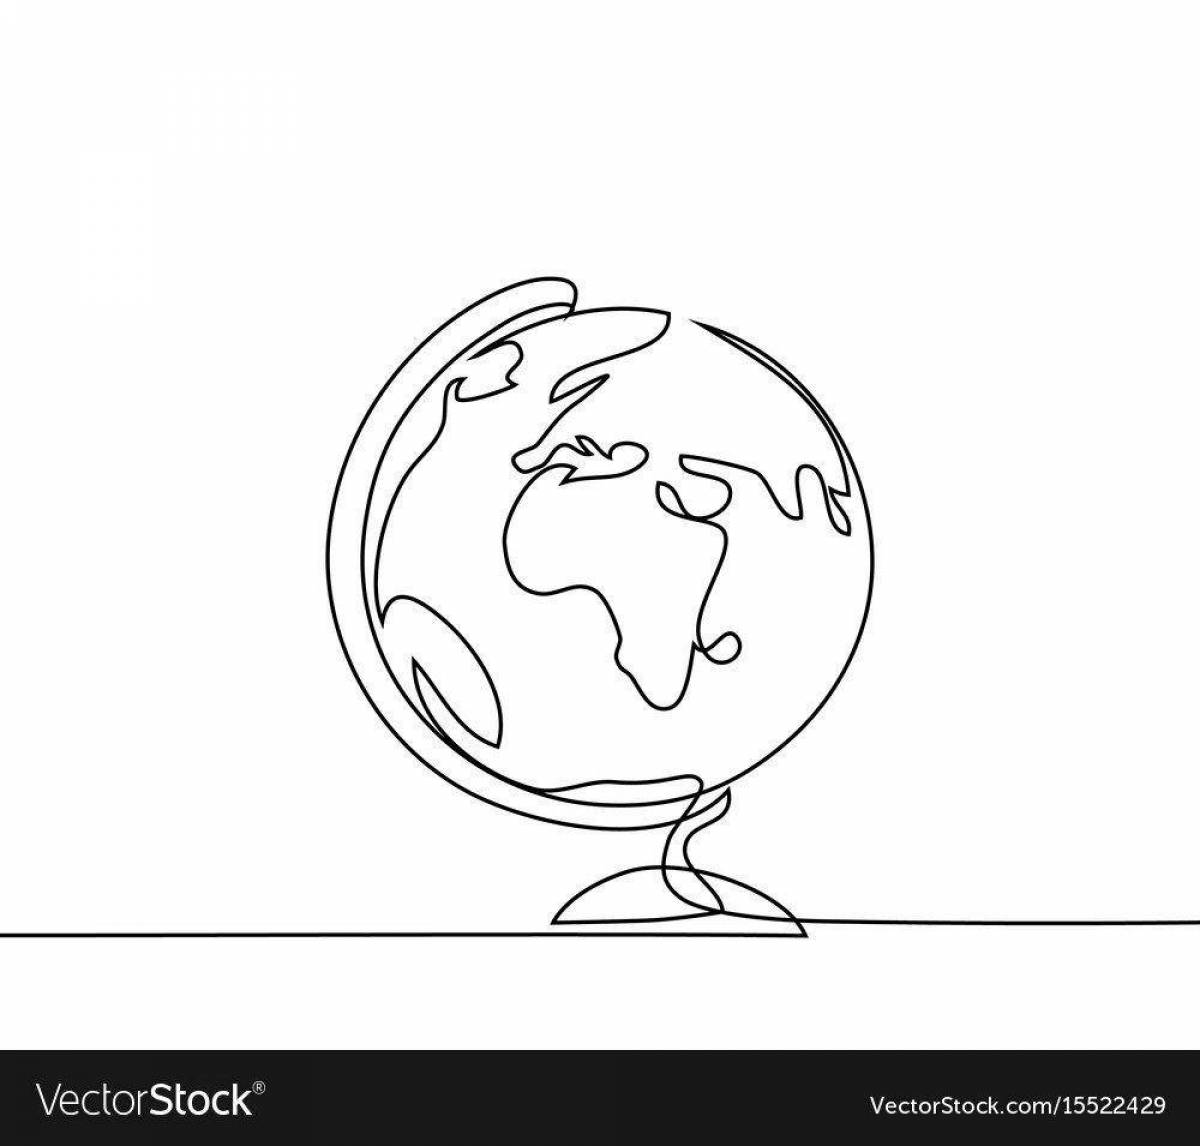 Globe drawing for kids for #10